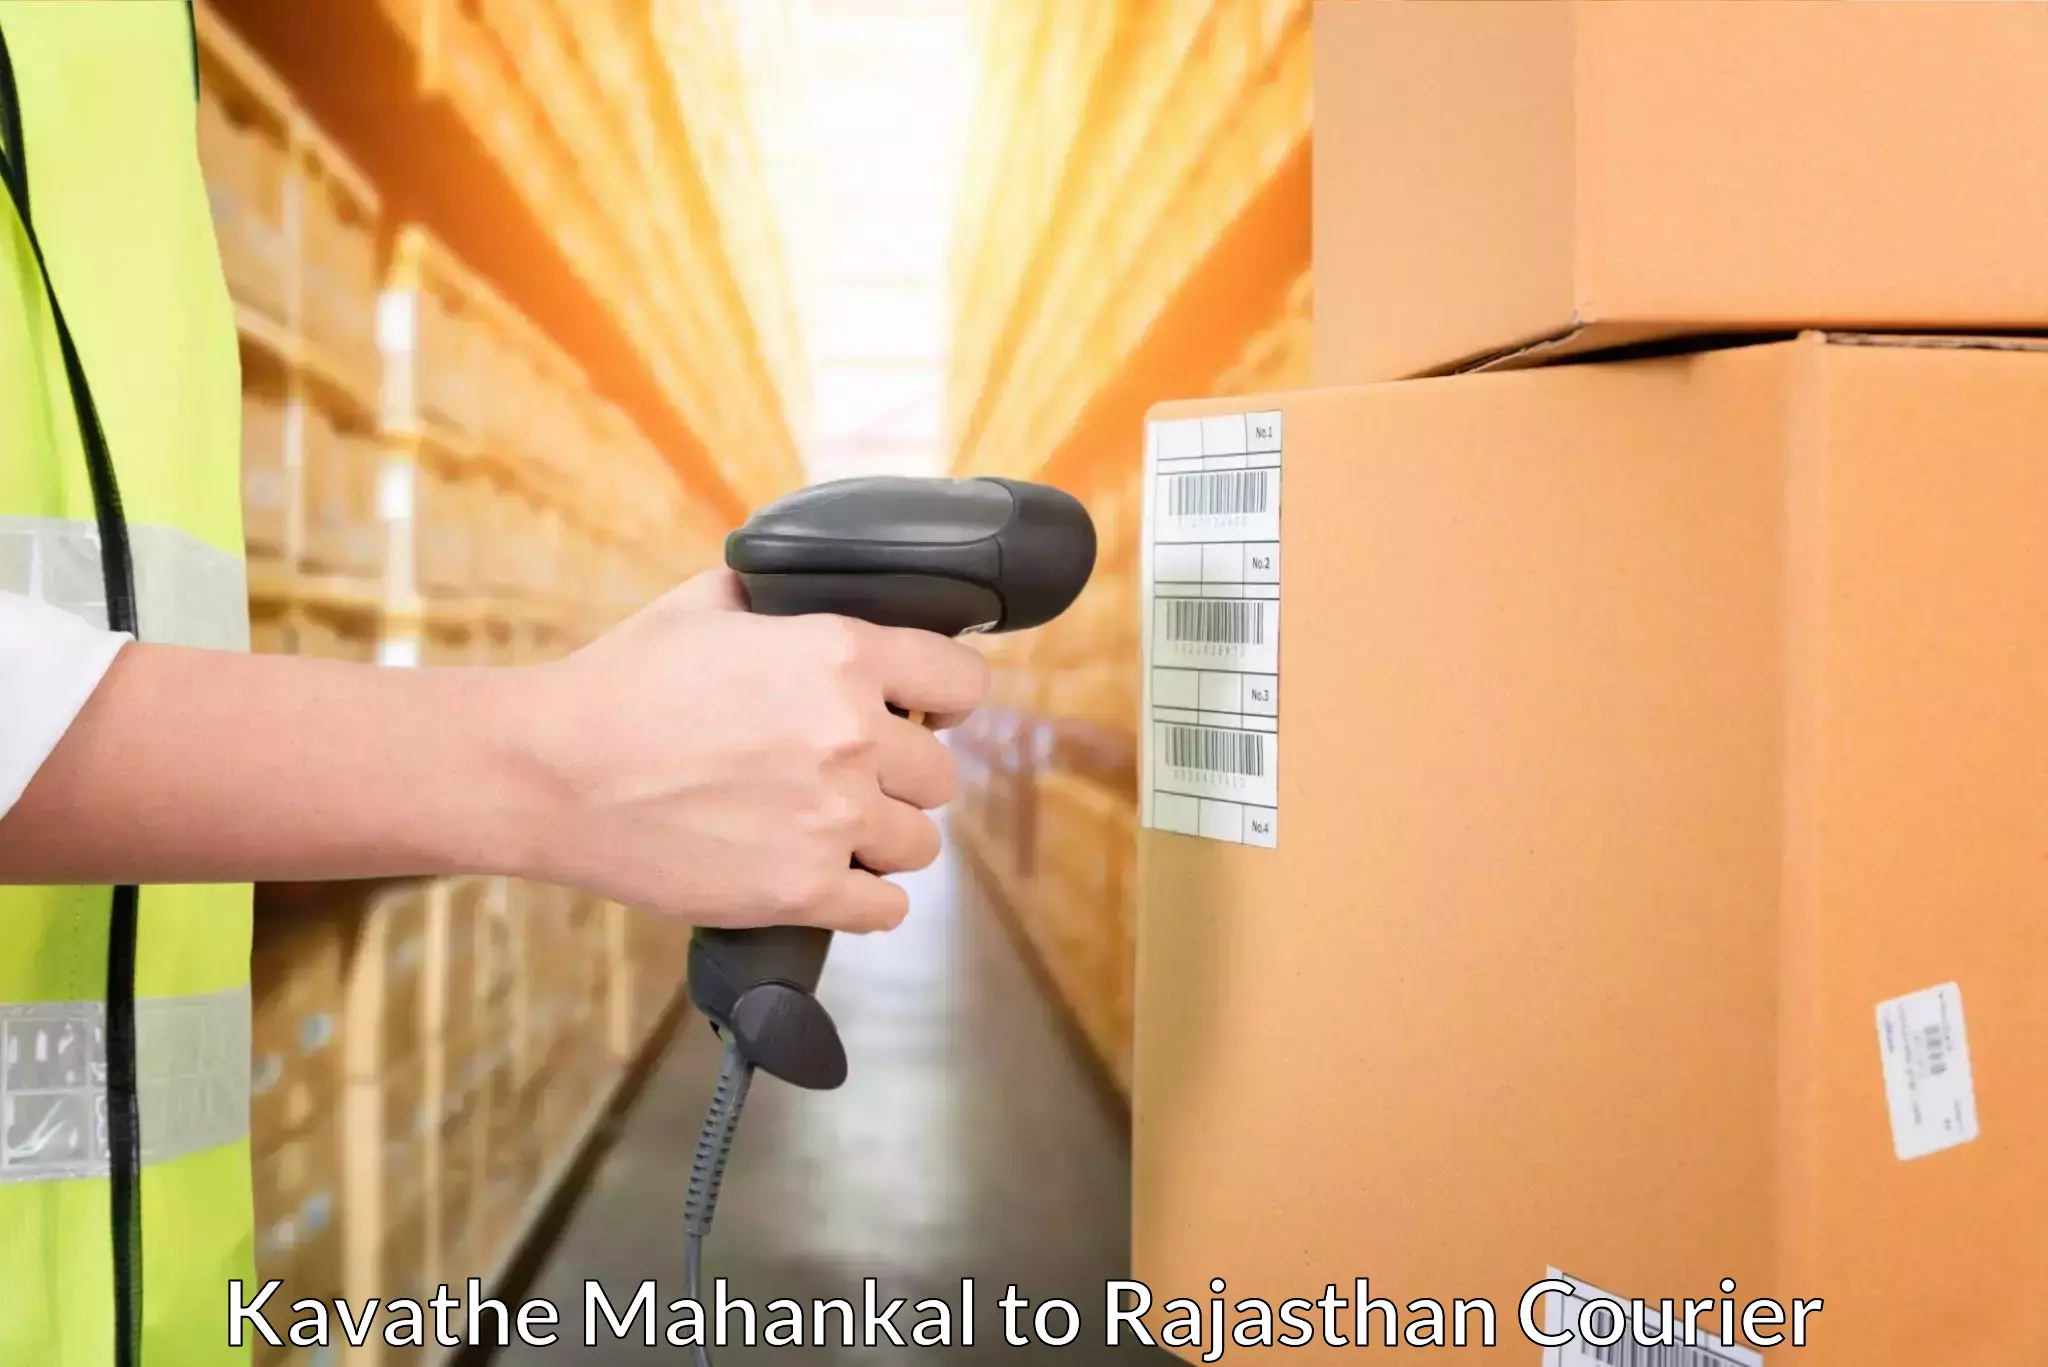 Reliable delivery network Kavathe Mahankal to Khanpur